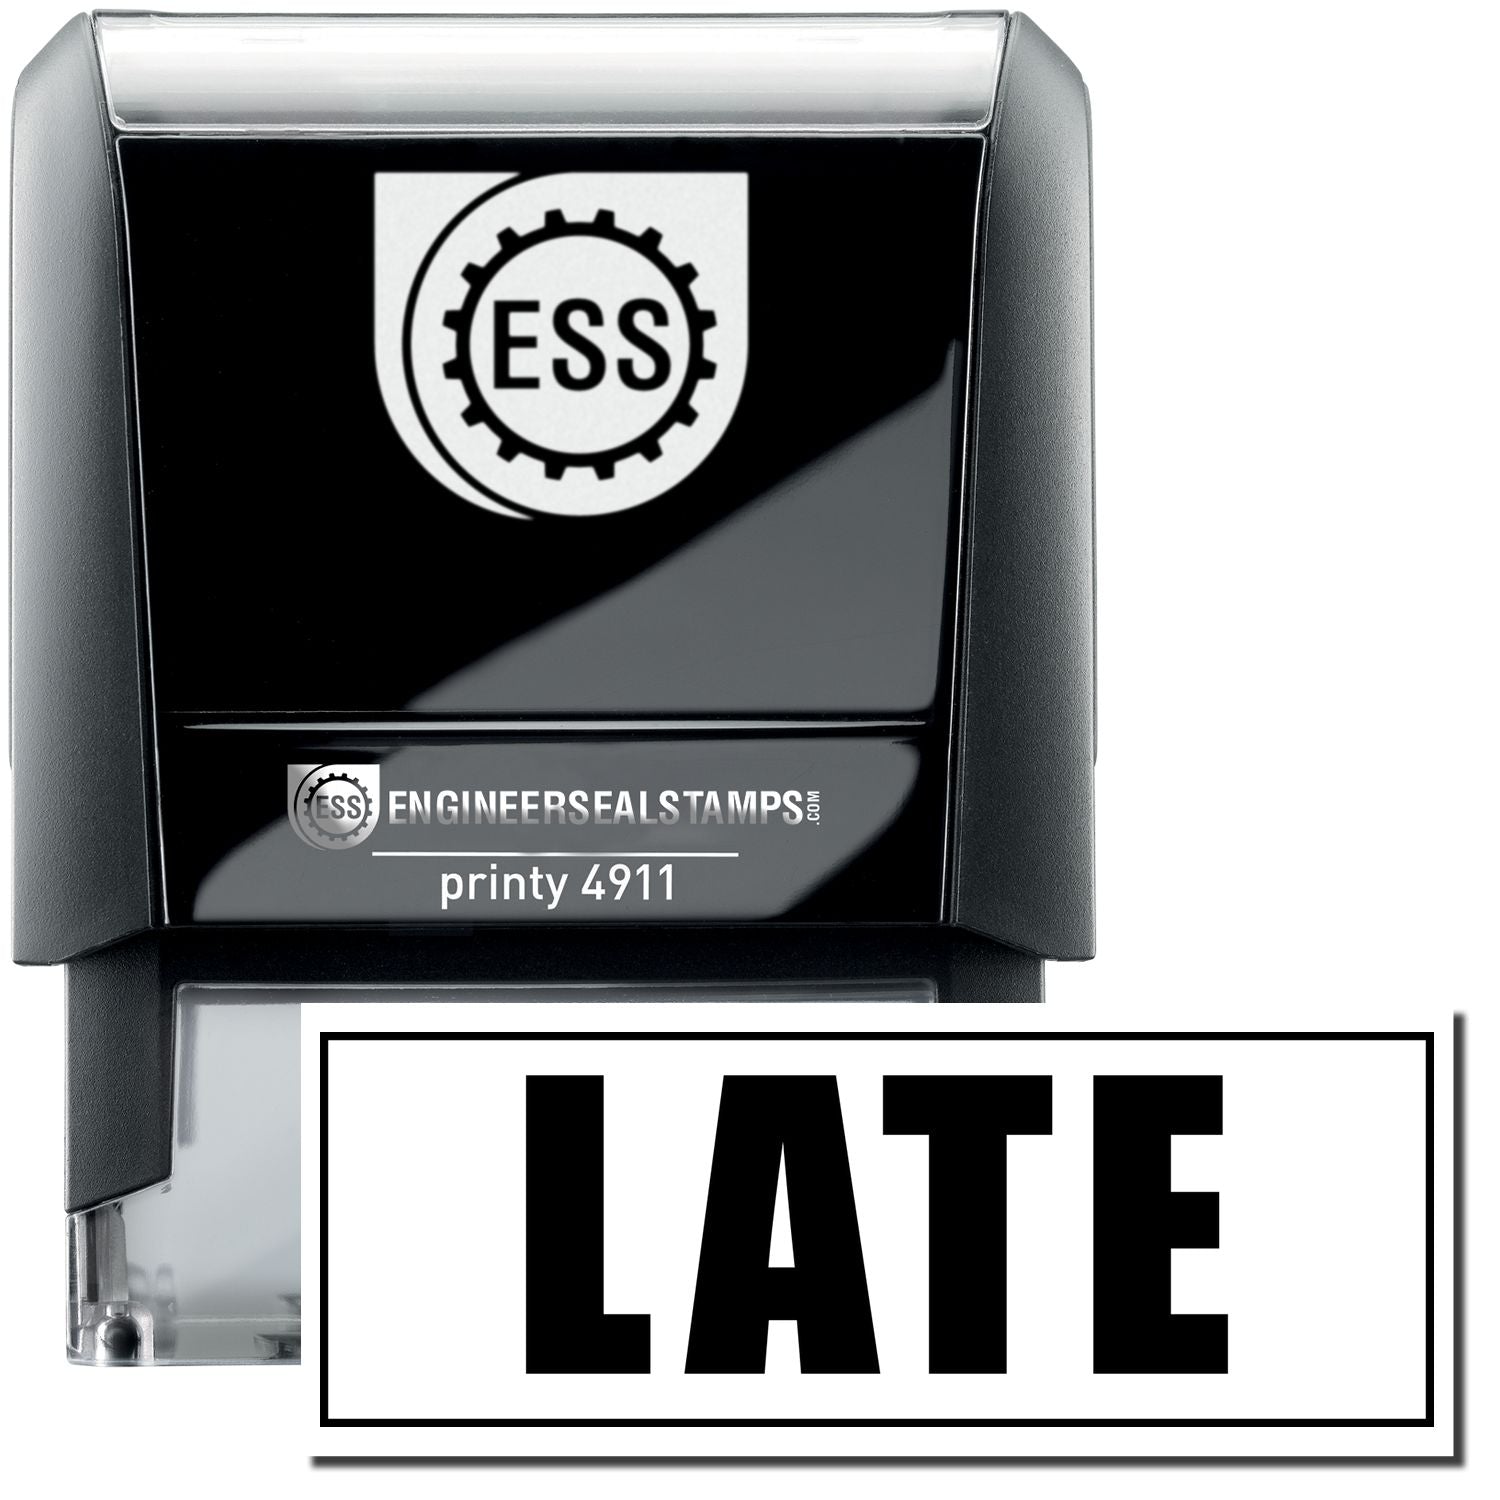 A self-inking stamp with a stamped image showing how the text "LATE" (in bold font with an outline border) is displayed after stamping.